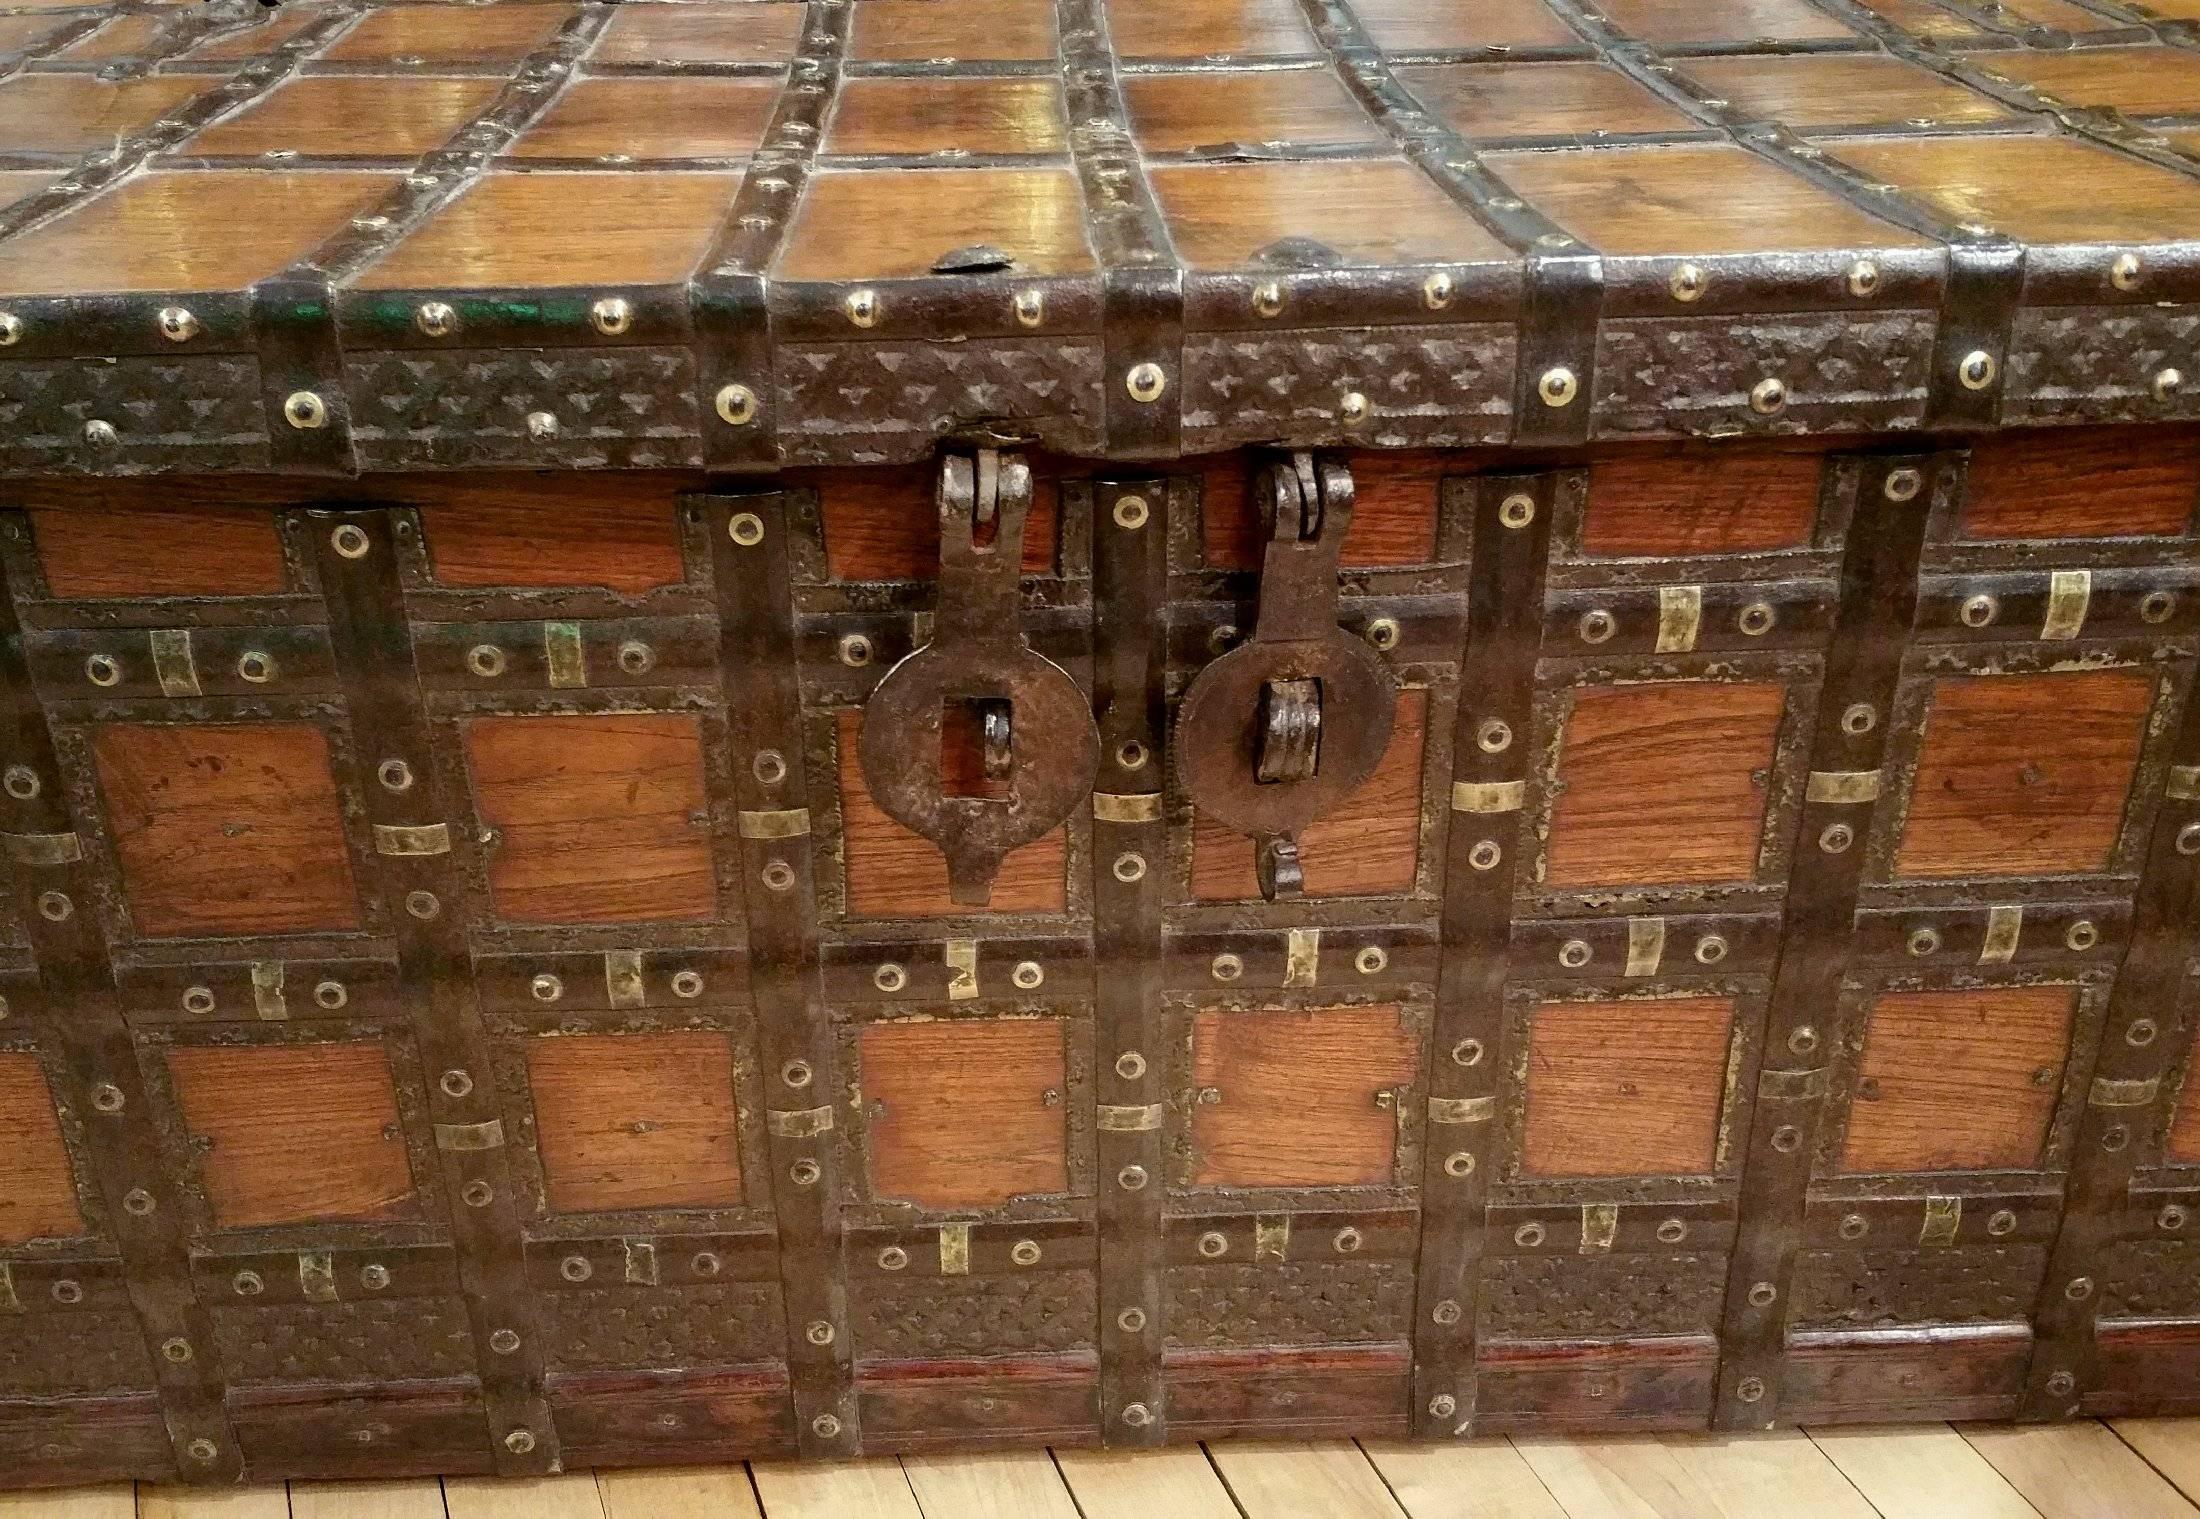 This very handsome and well-proportioned 19th century, Anglo-Indian teak chest features a series of iron bands and straps which wrap around the entire piece. The front has a double catch lock and a candle box on the inside. It measures 51 ½ in – 130